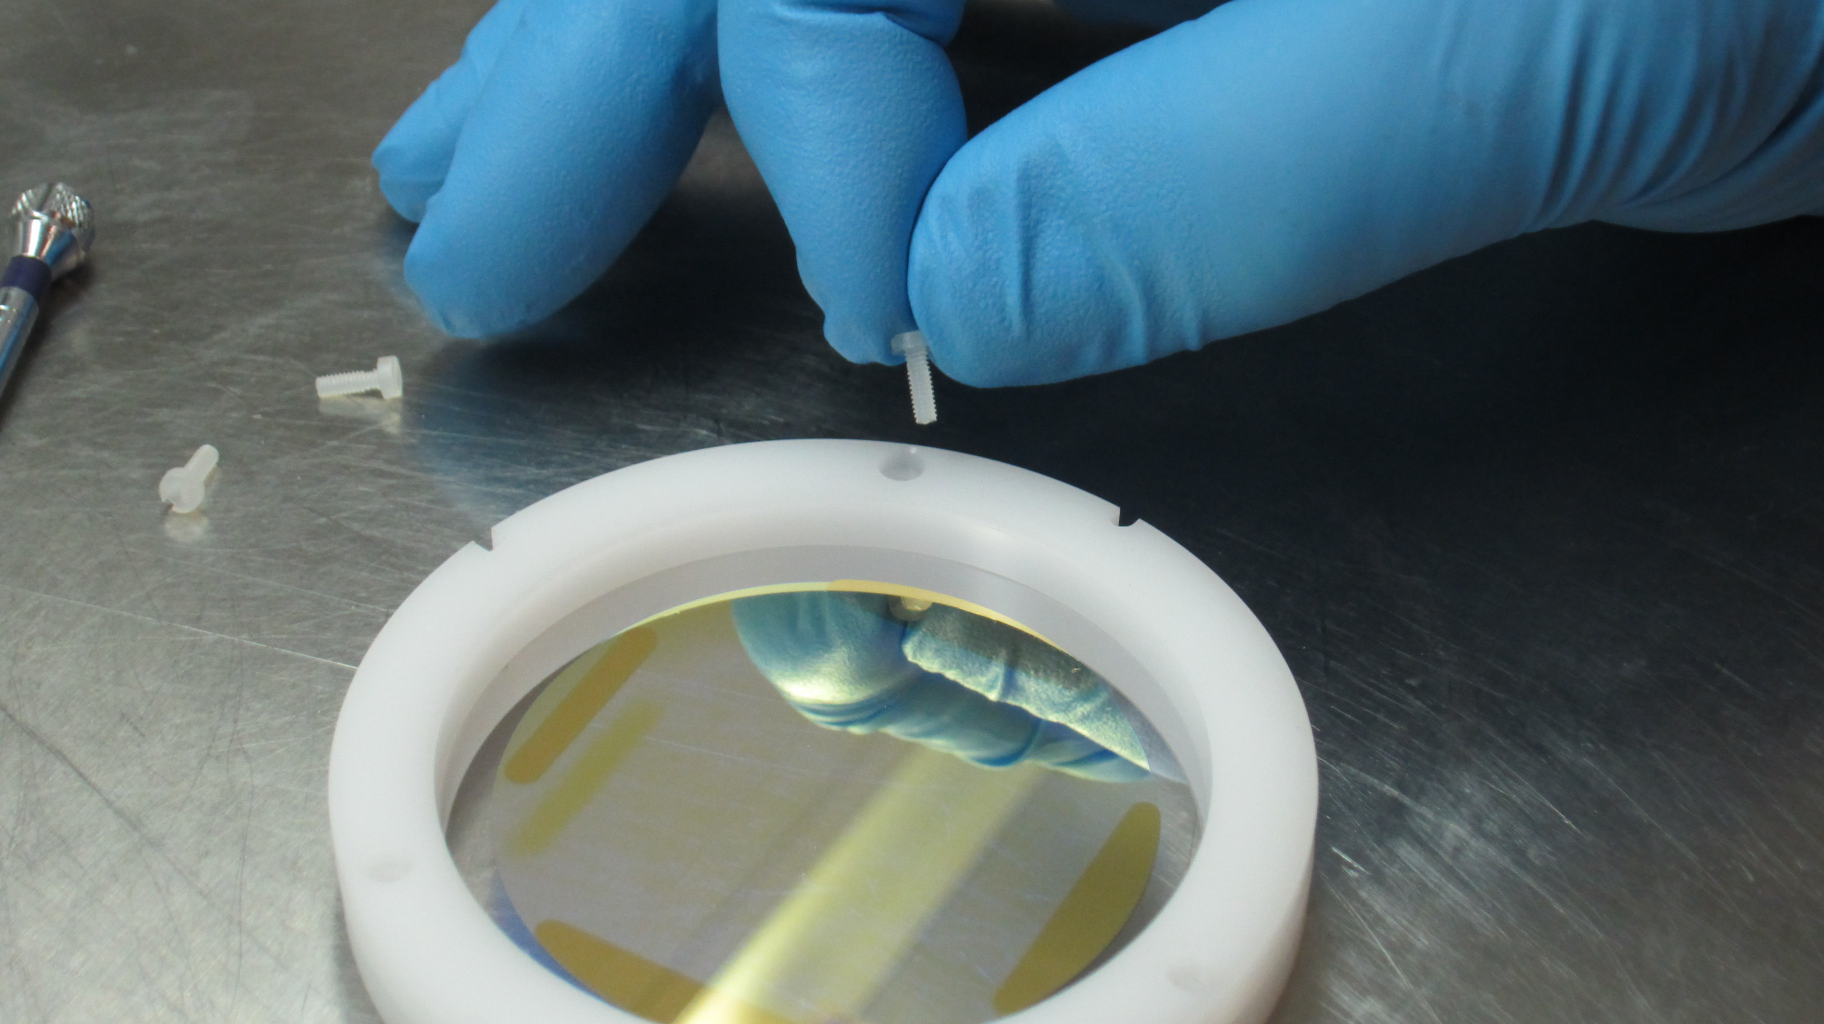 One of the highly precise optical filters